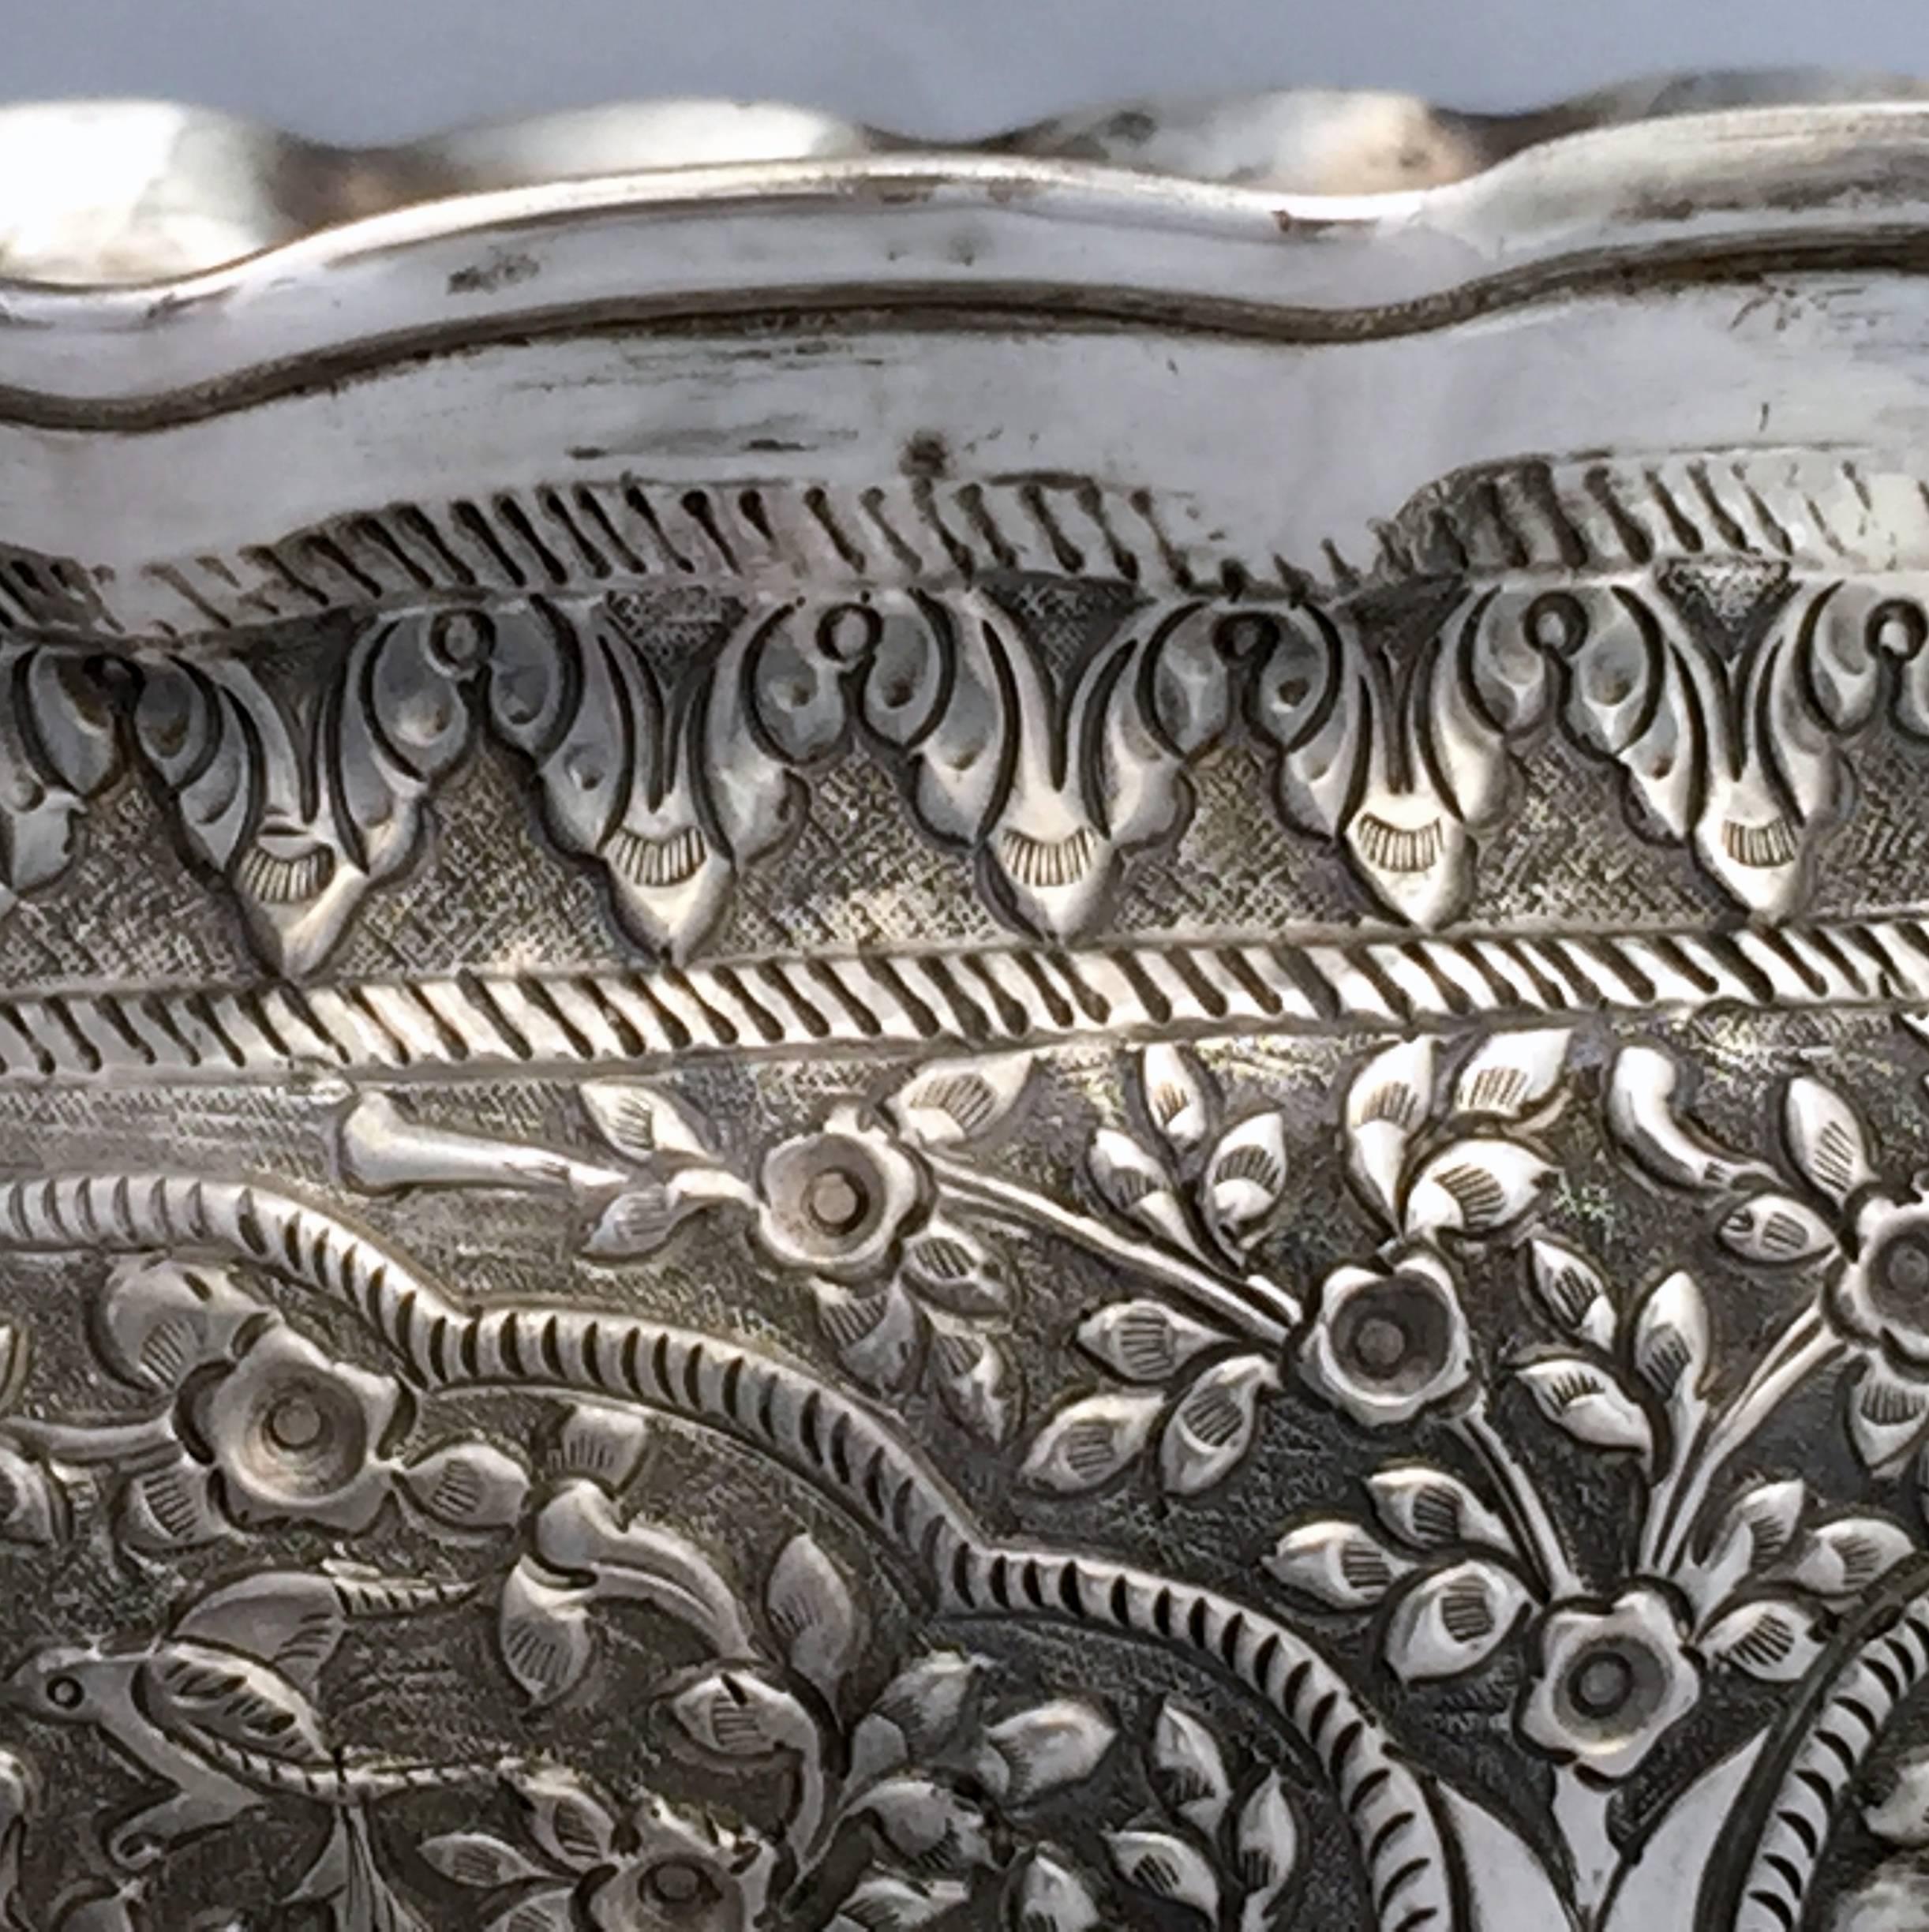 A huge Indian presentation bowl in the Cutch style, considered to be the best example of Indian silver craftsmanship in the late 19th century and much collected. 
The panels are worked with the infinite scrolling pattern that the Cutch craftsmen